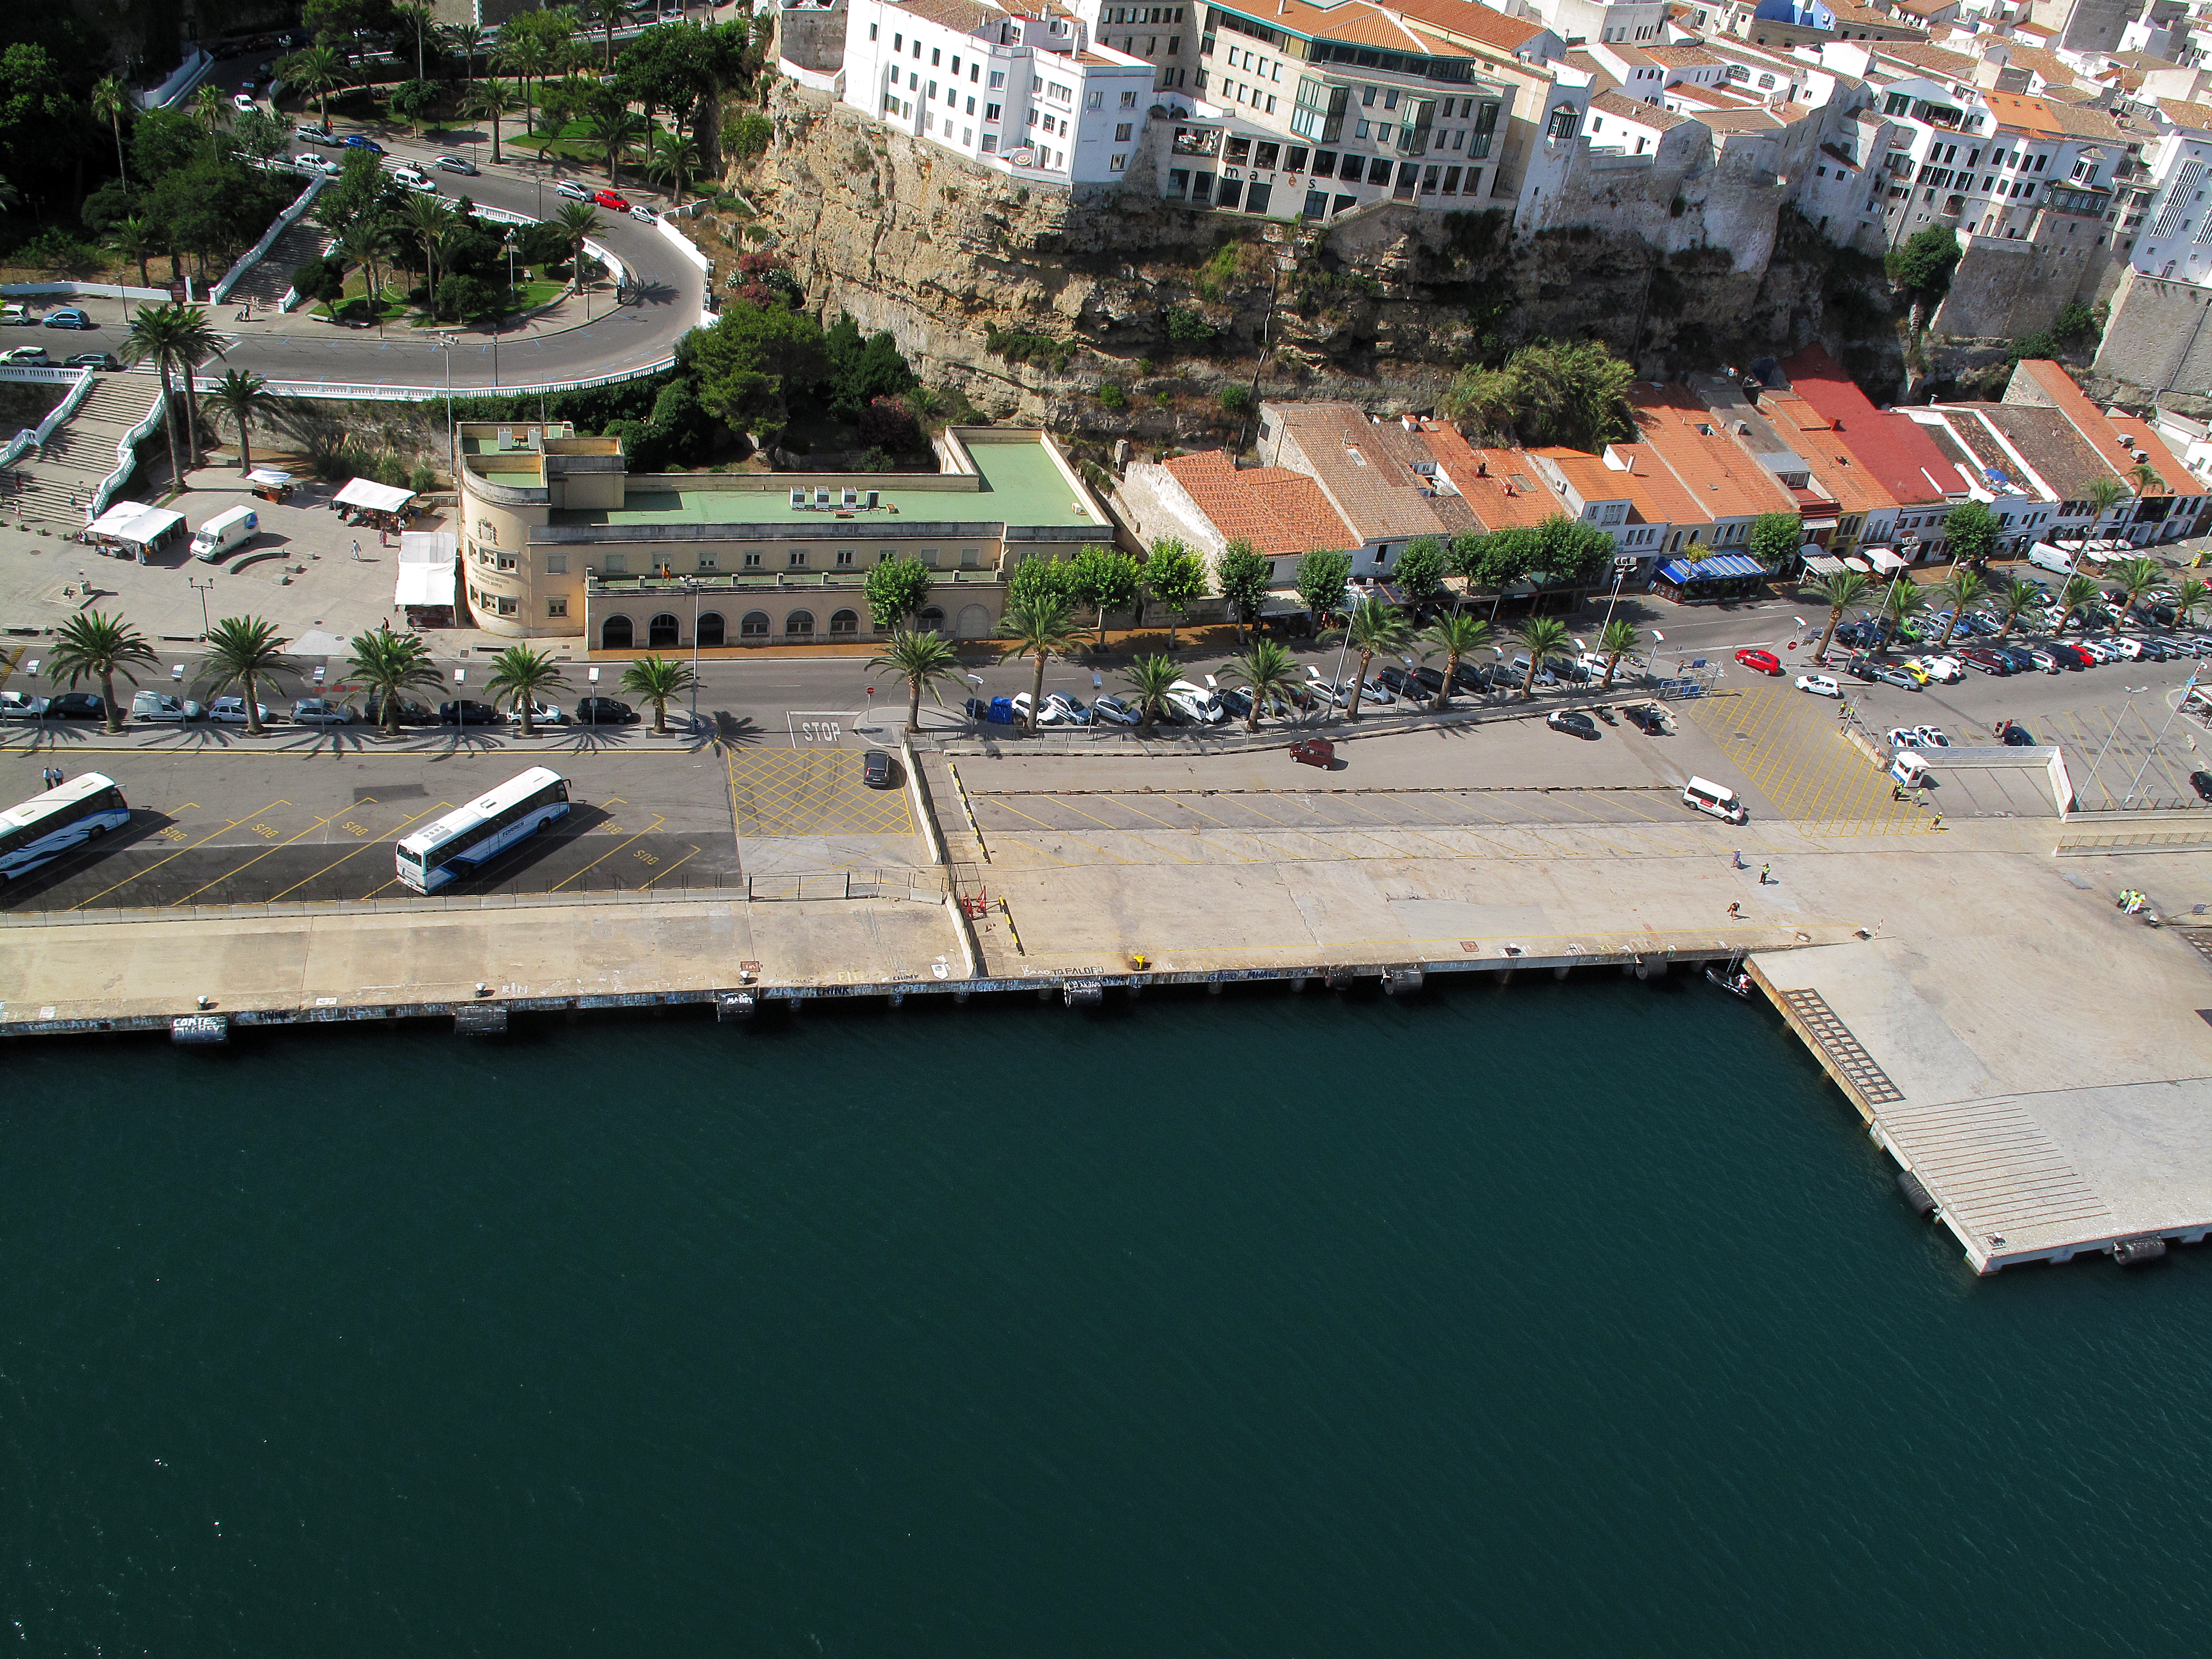 Works to convert Muelle de Poniente (Maó) into a walkway have started